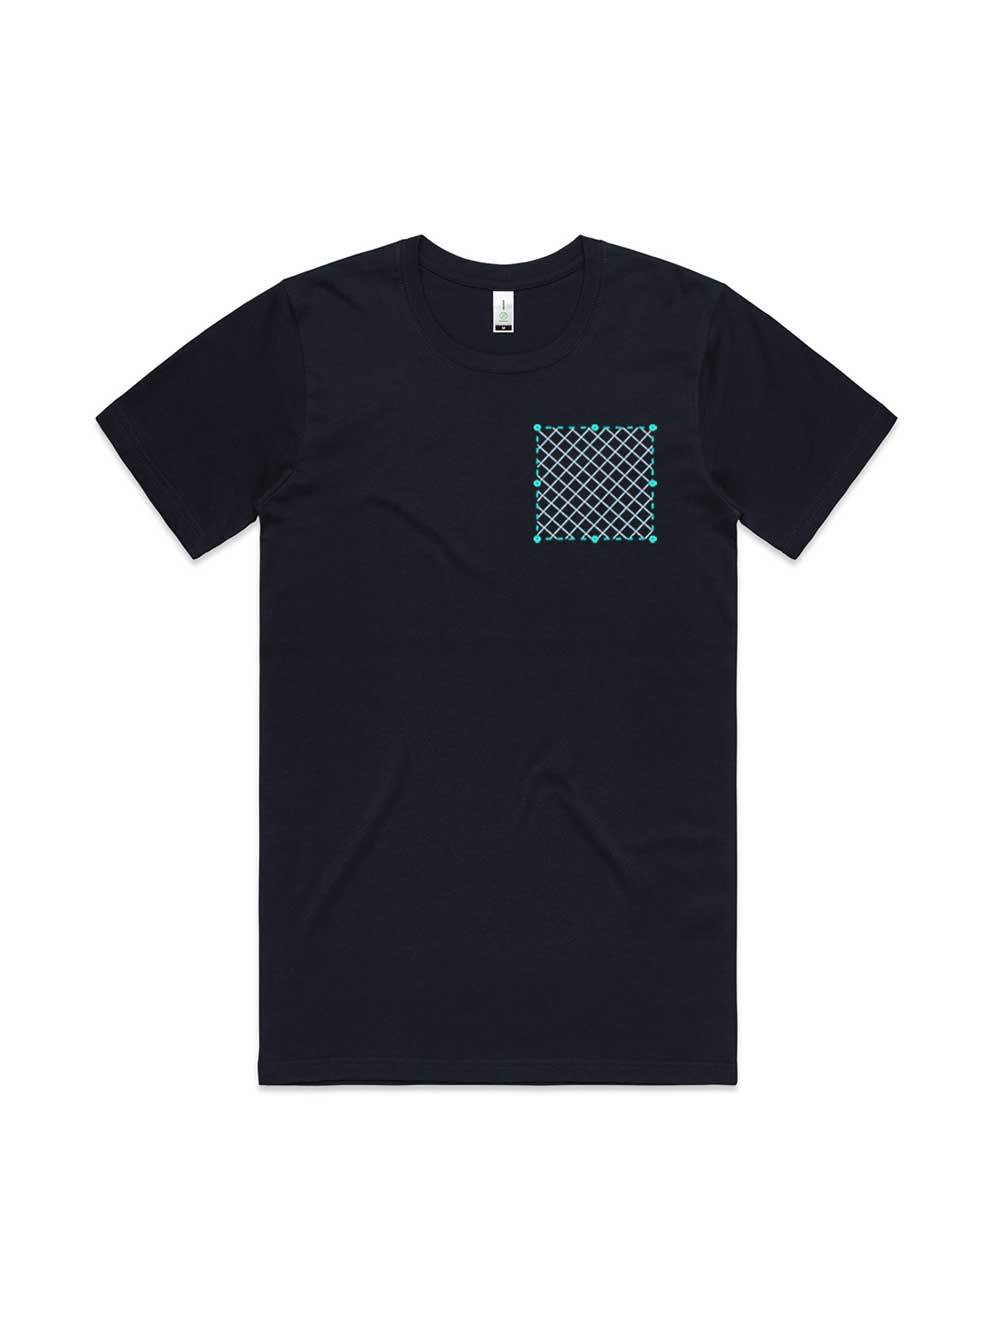 Embroidered AS Colour Organic Tee